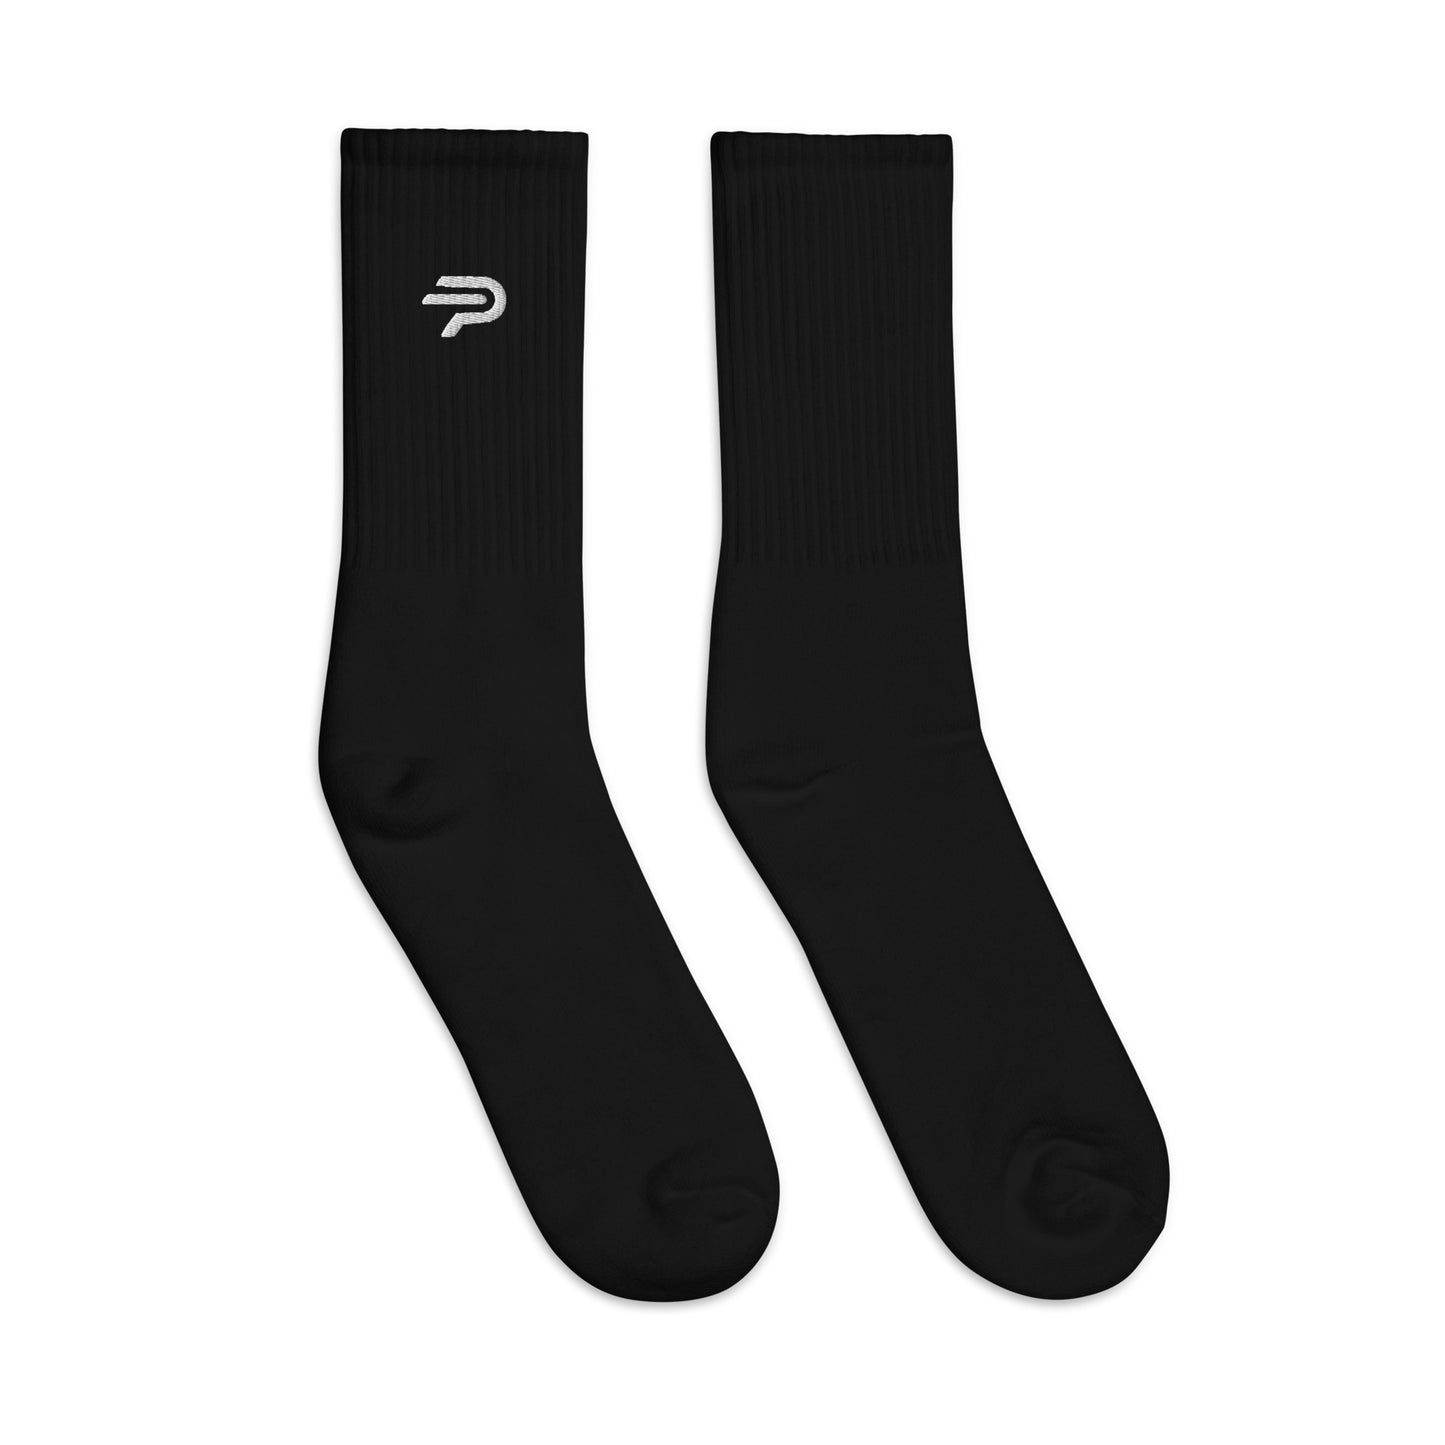 Parity Embroidered socks